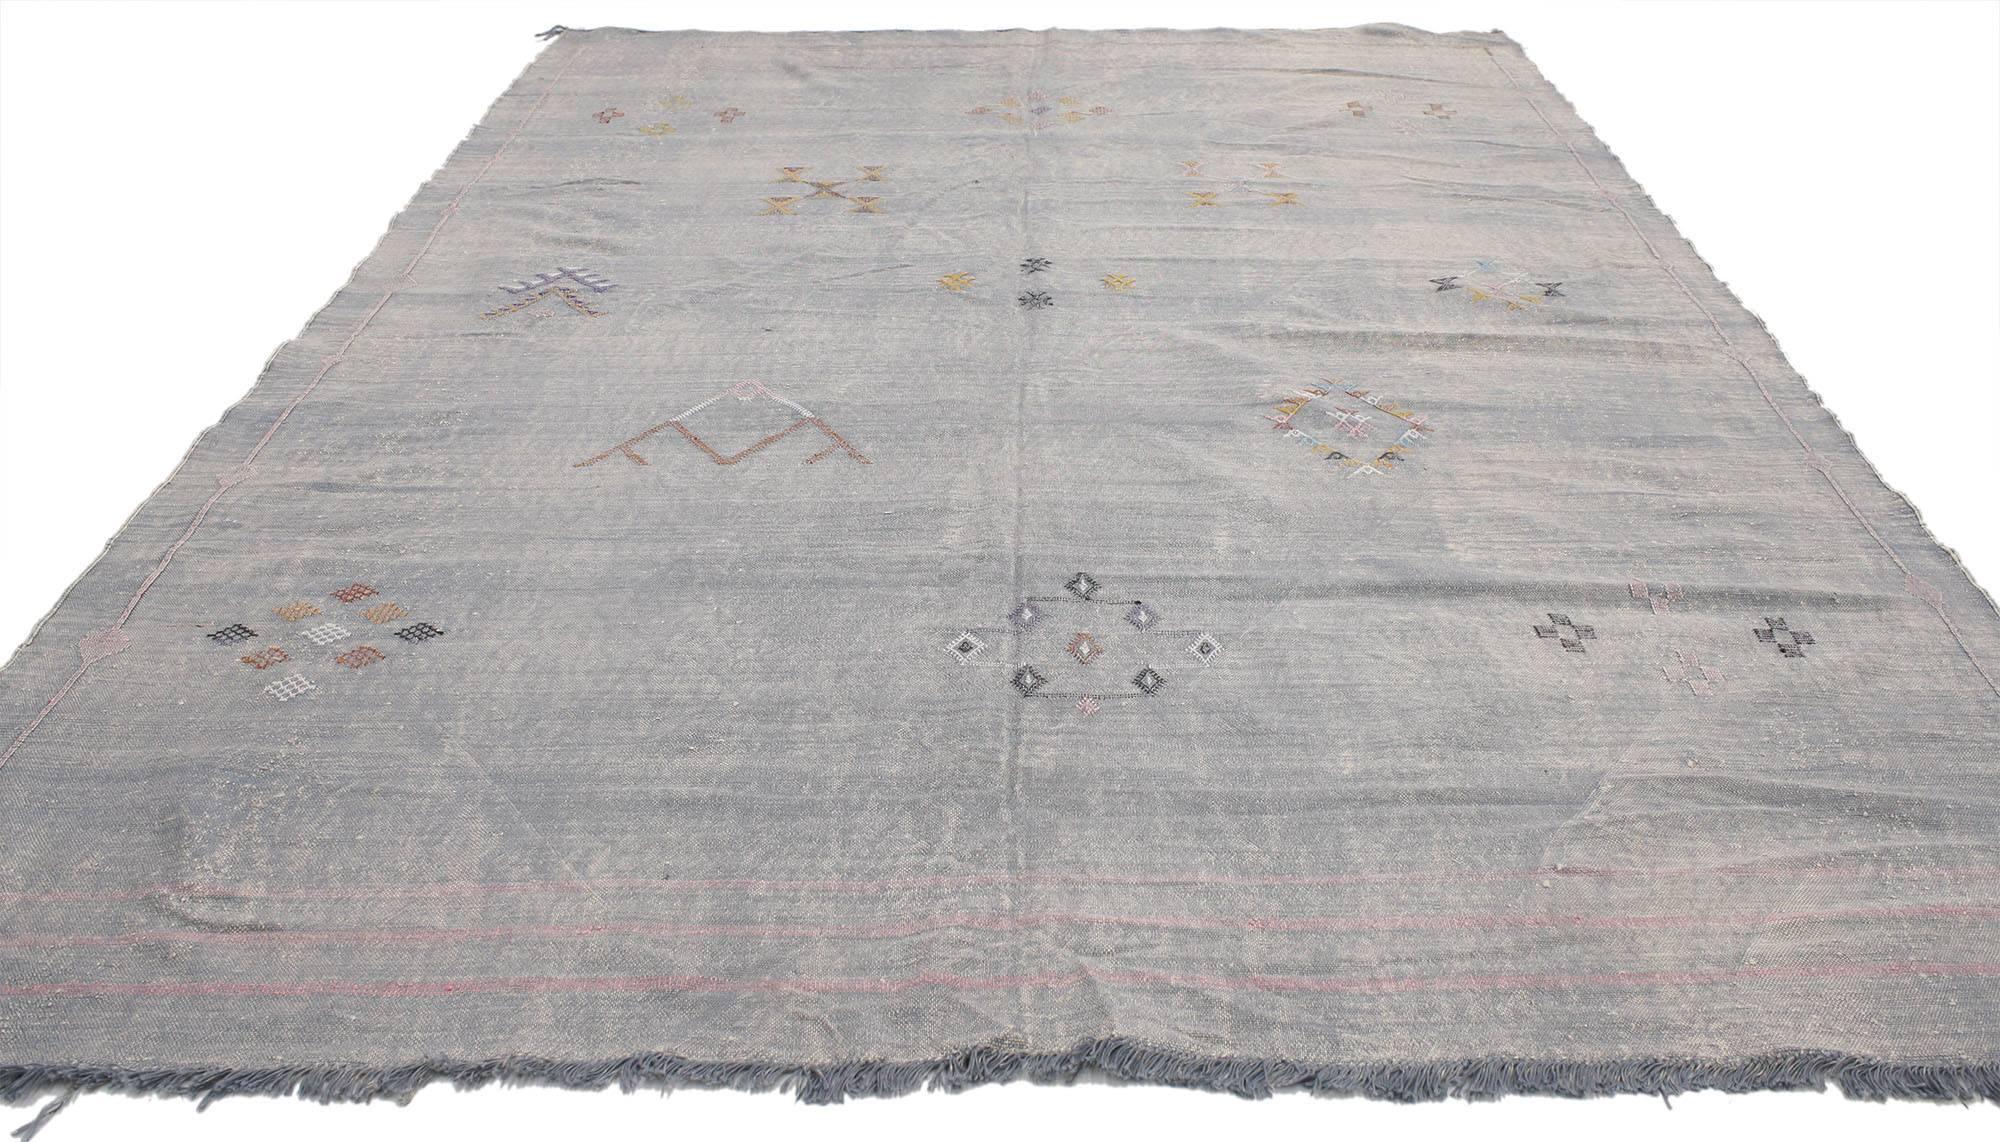 20540 cactus silk vintage Moroccan Kilim rug. This vintage Sabra Cactus silk vintage Moroccan Kilim rug handwoven by the Berber Tribes of Morocco. Features soft colors of geometric shapes galore and Berber symbols of nature on an abrashed slate blue